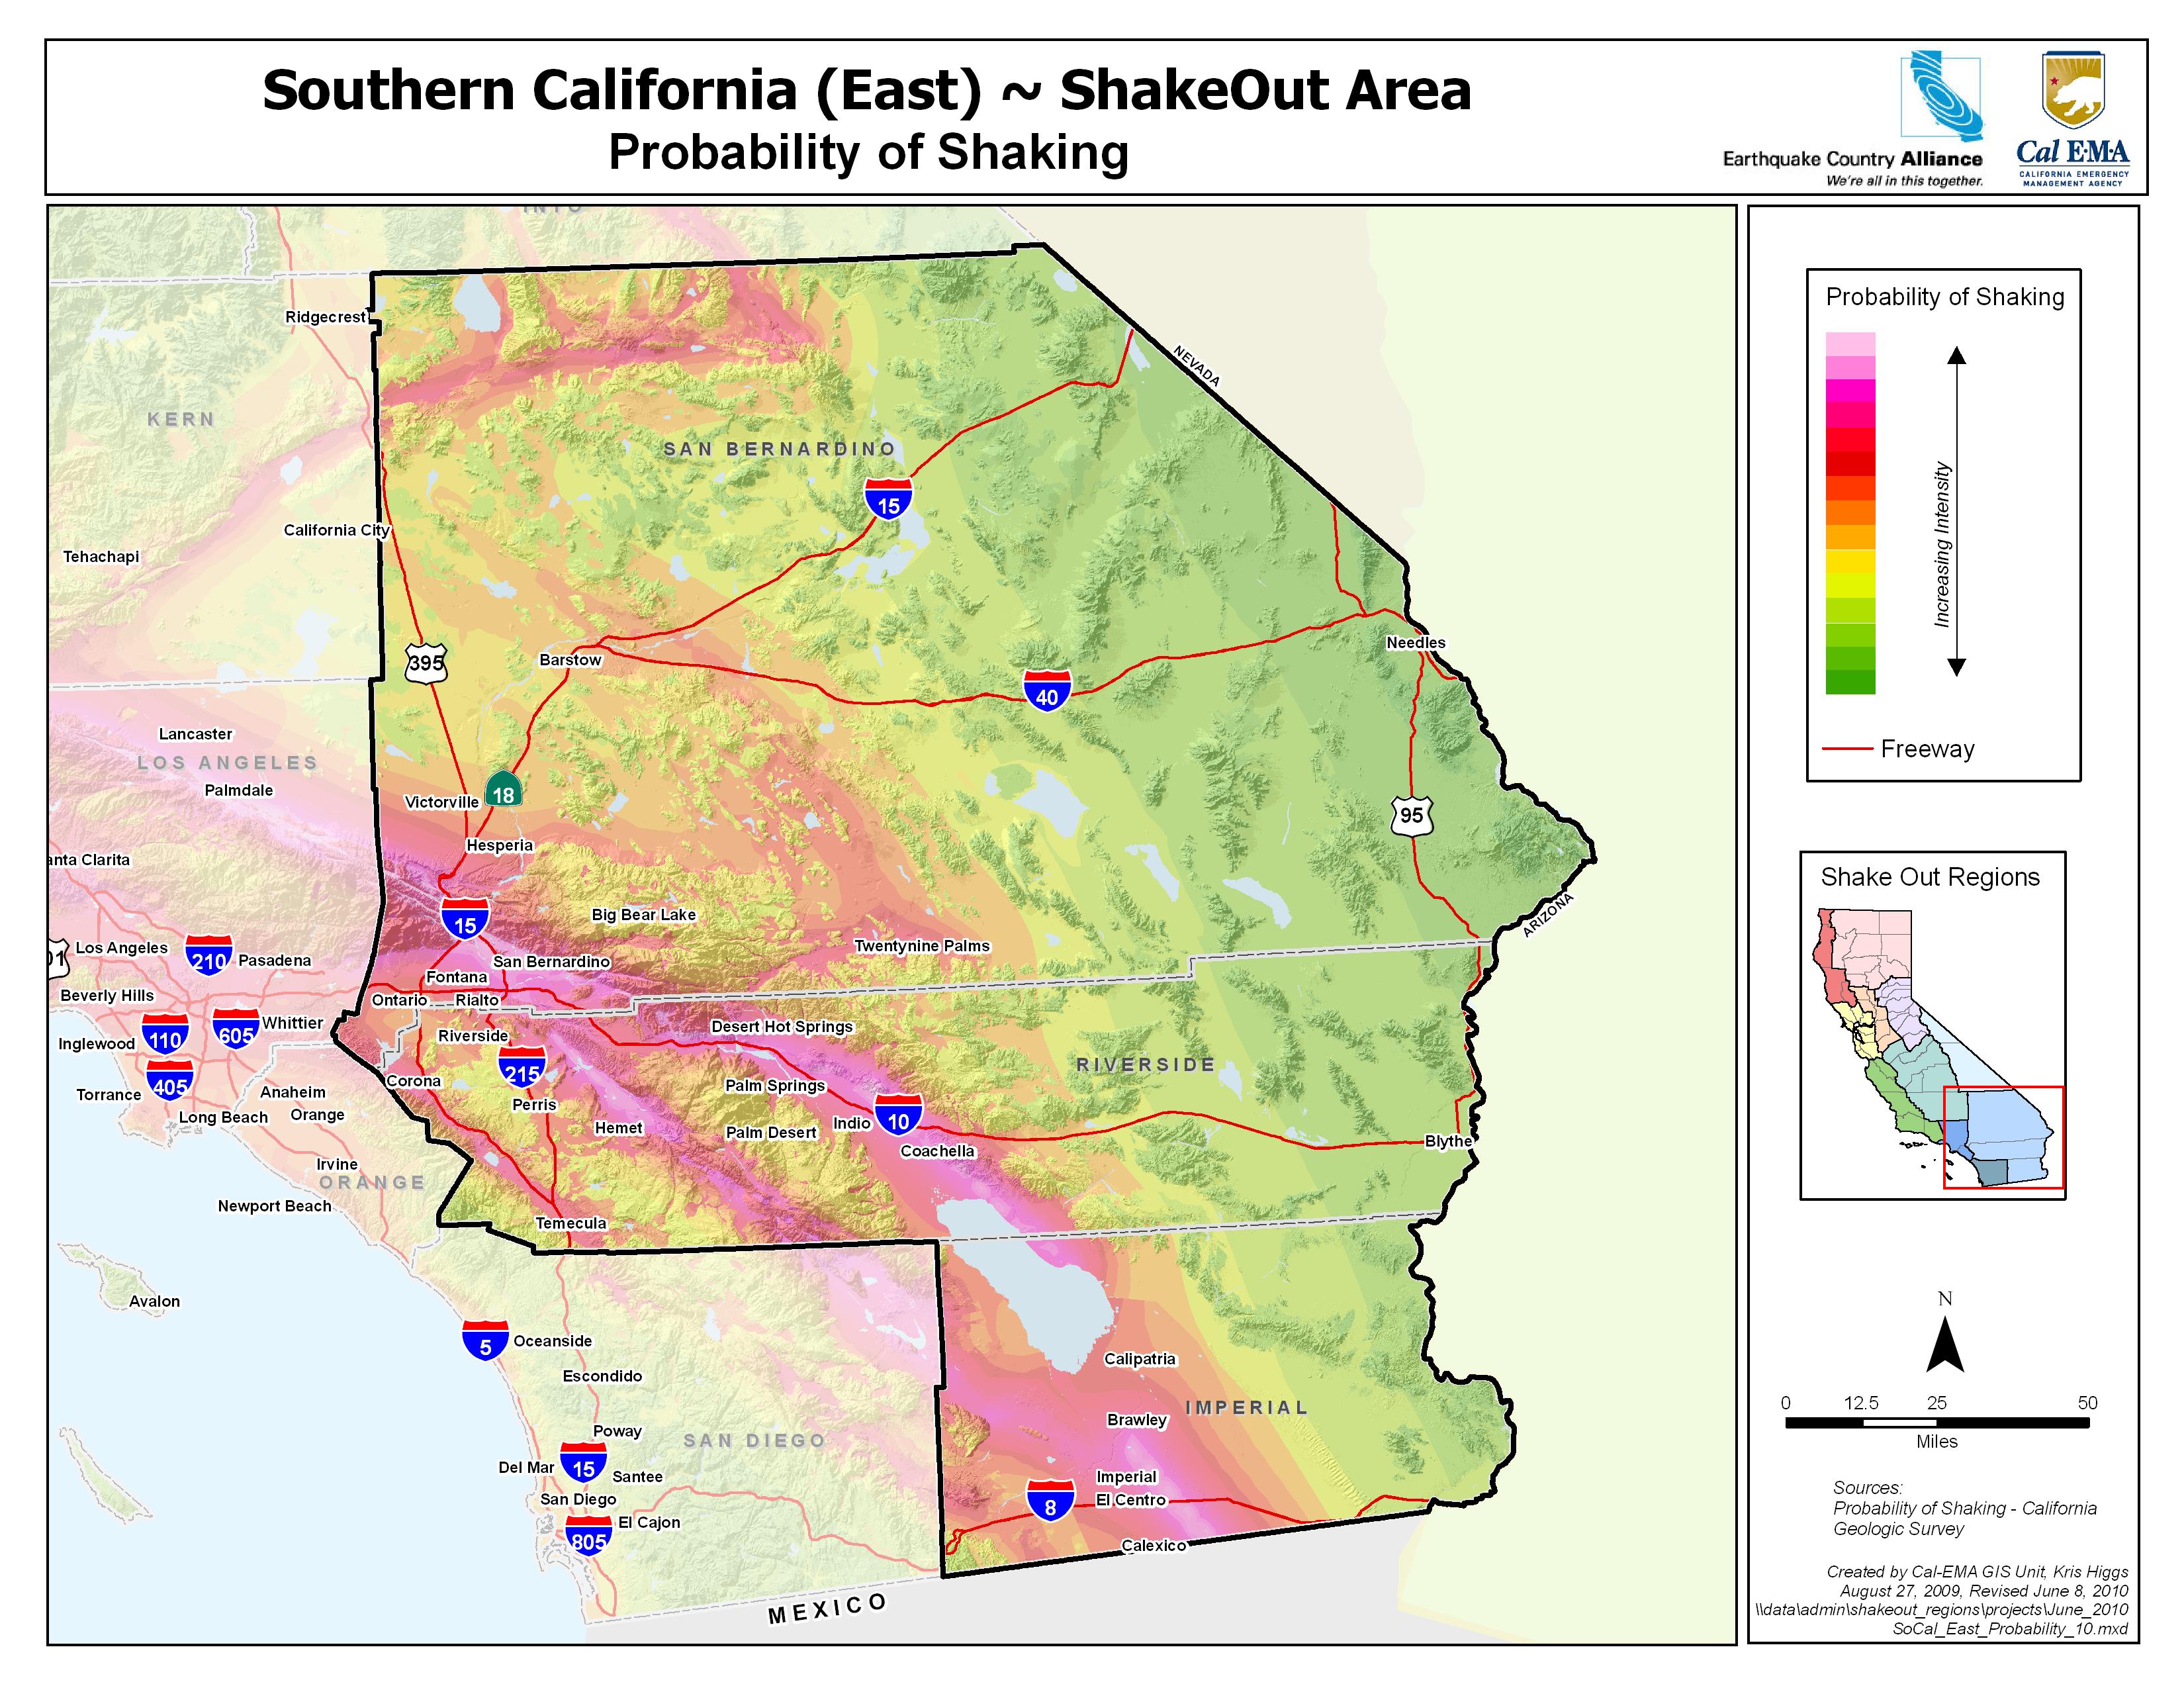 large earthquakes anywhere in the southern california east area can